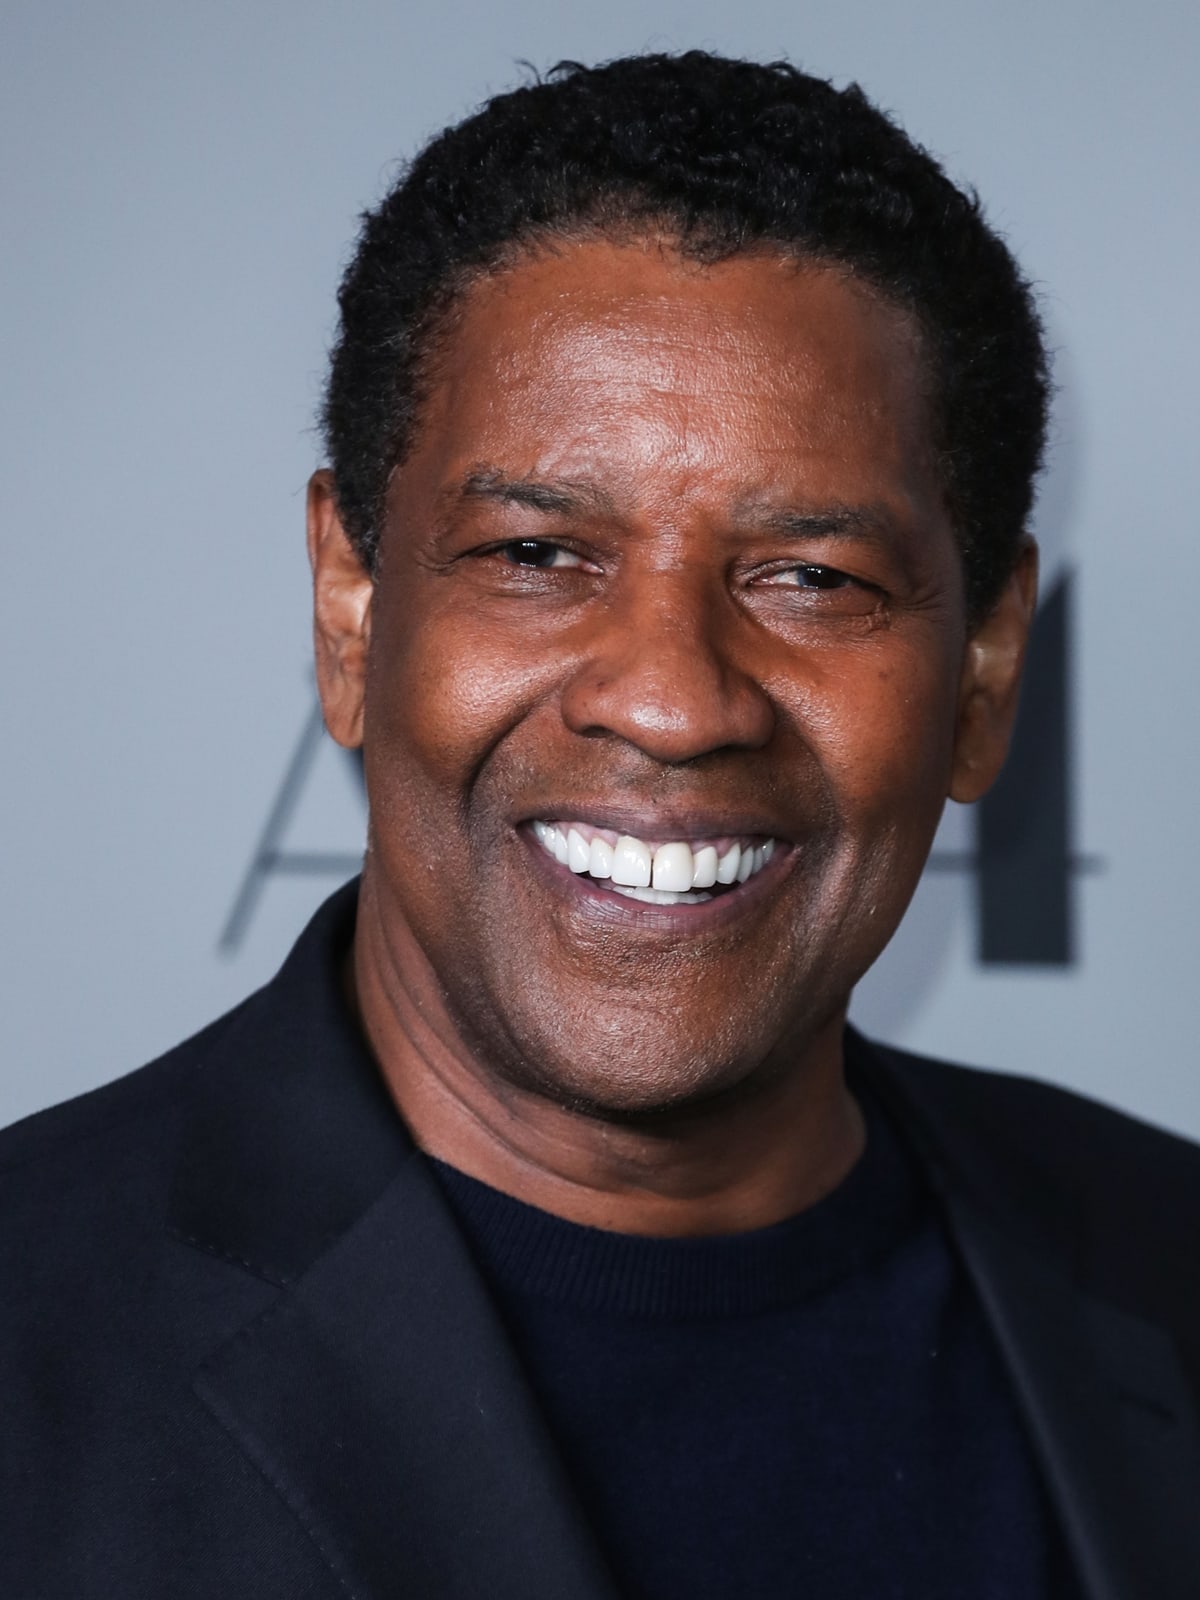 Denzel Washington's father was a Pentecostal preacher who belonged to the Church of God in Christ denomination